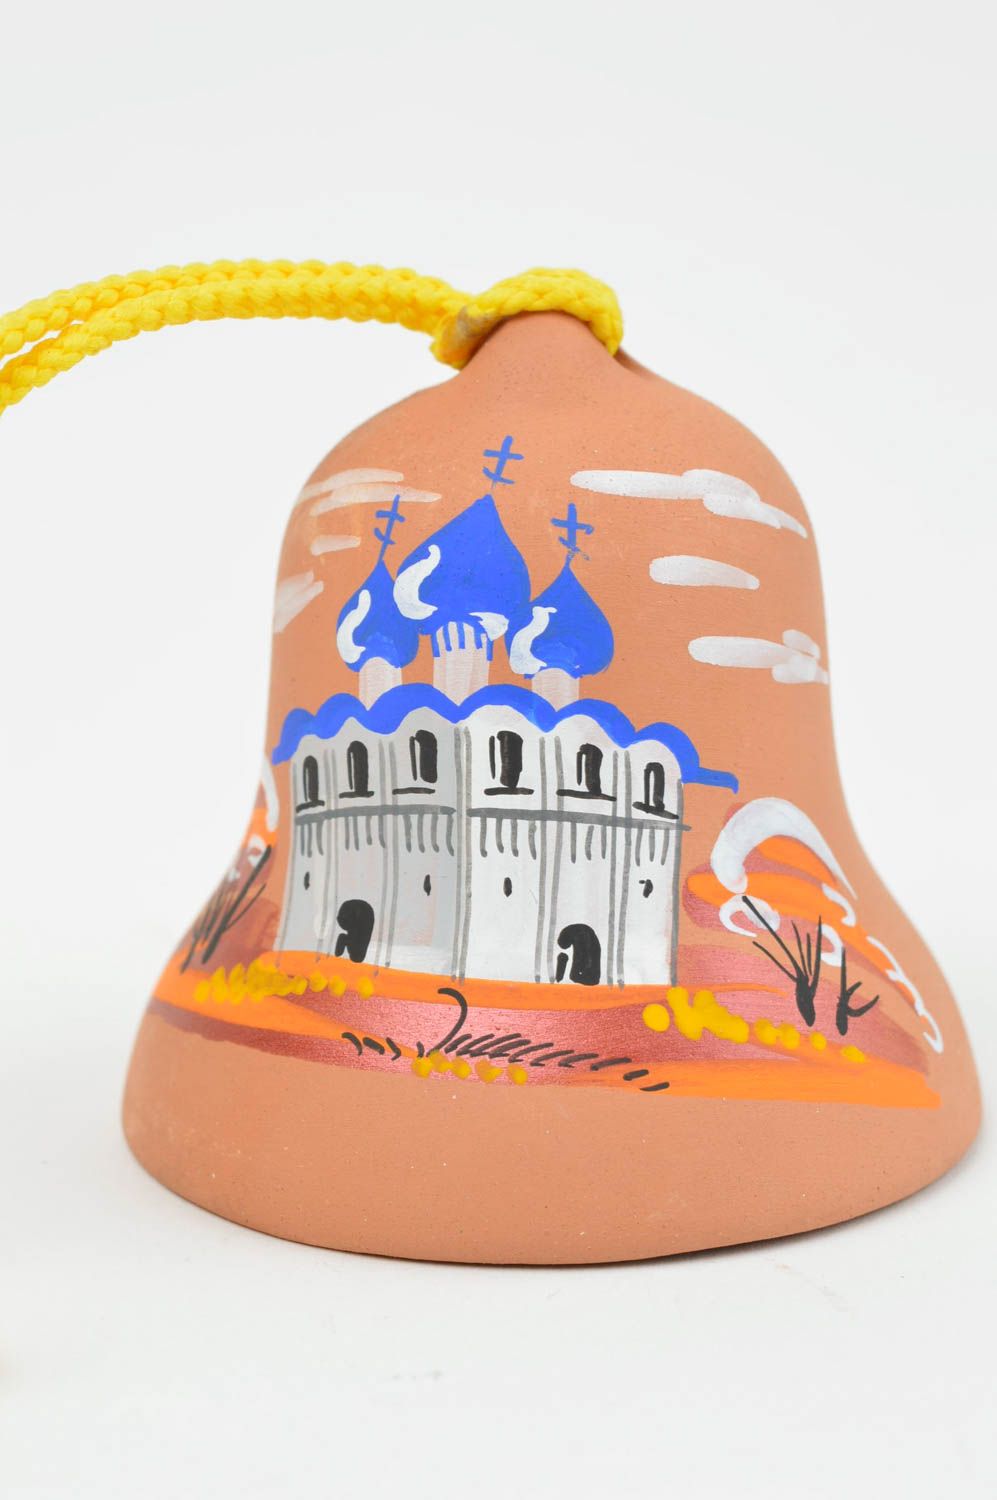 Unusual handmade ceramic bell designer clay bell home designs gift for believer photo 2